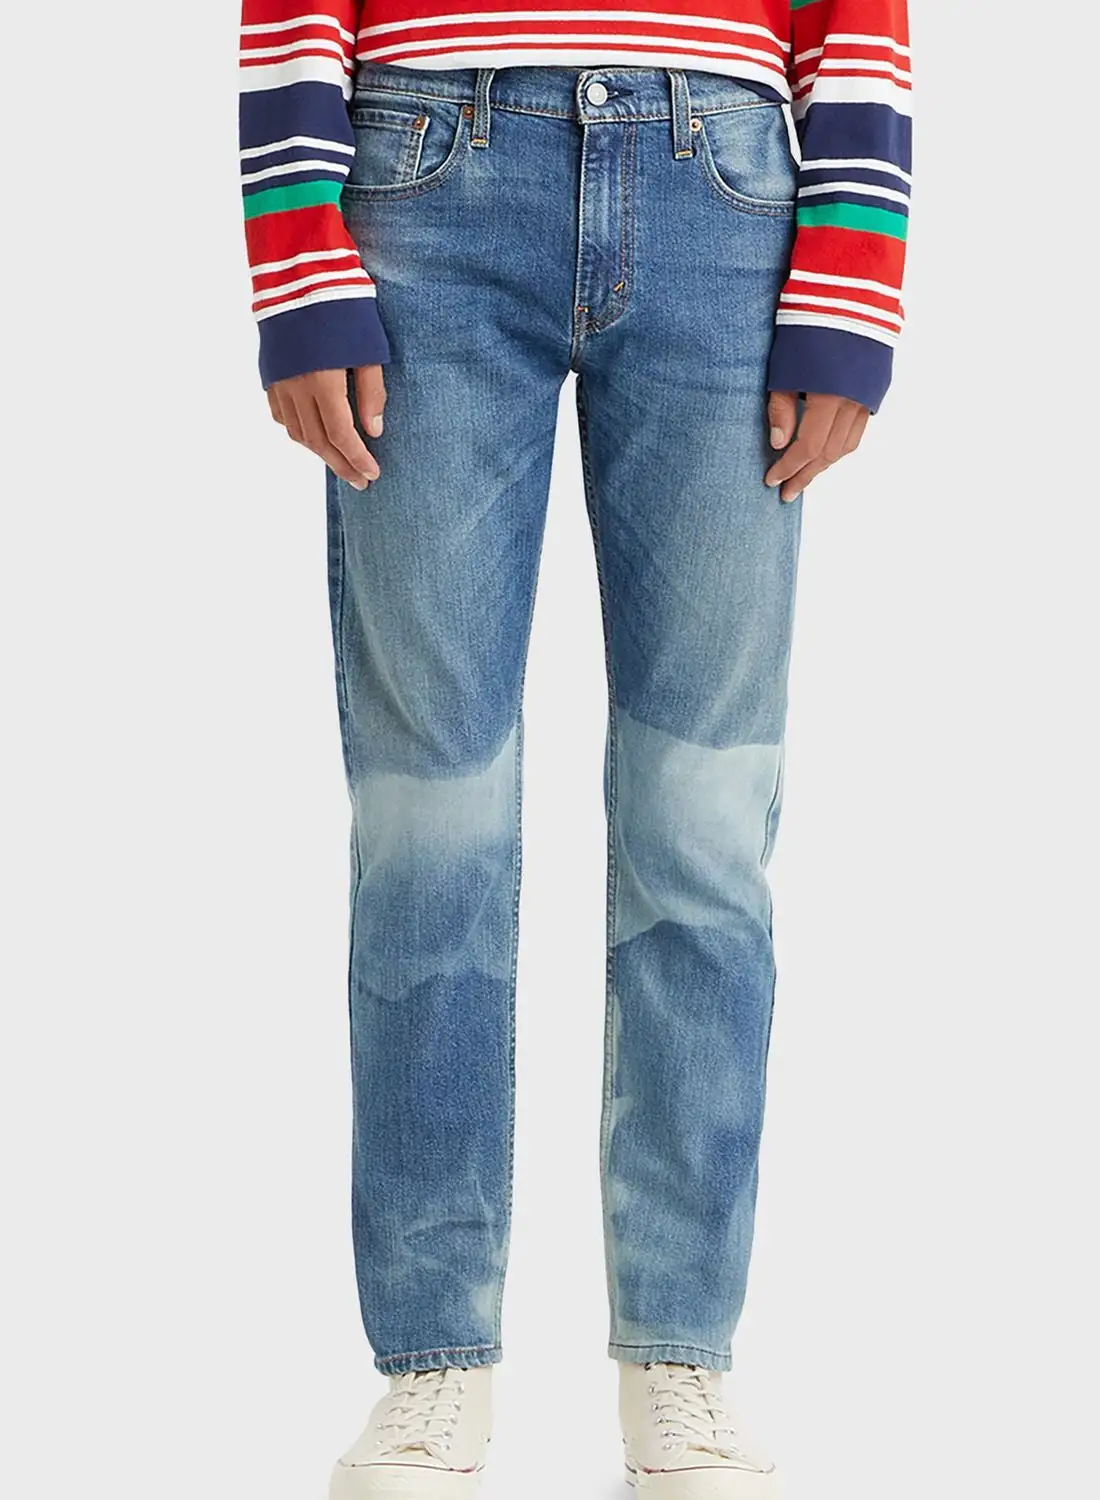 Levi's Light Wash Straight Fit Jeans